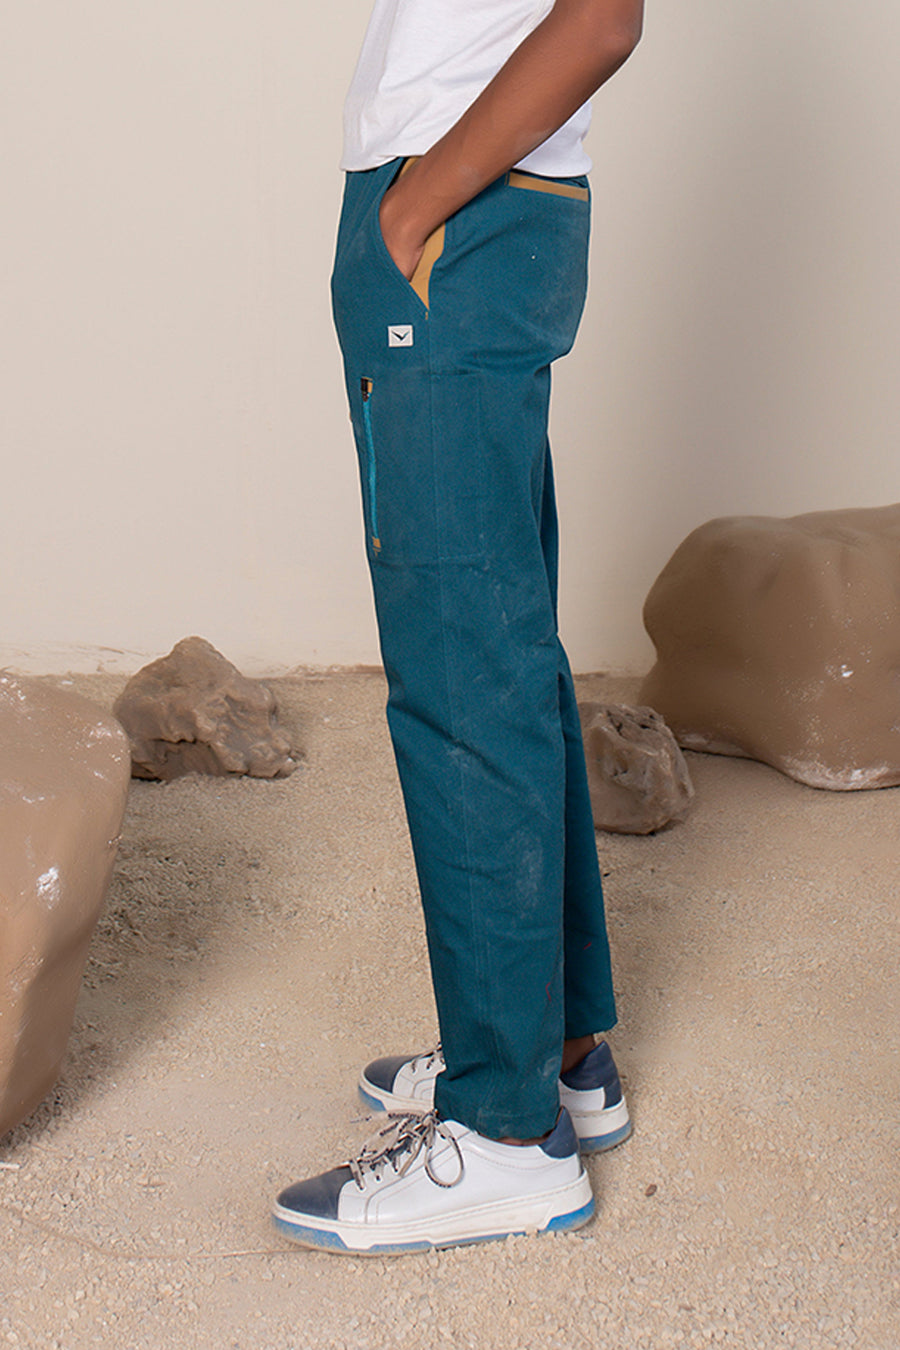 Men's Sequoia Canvas Pant in Teal   VOLO Apparel